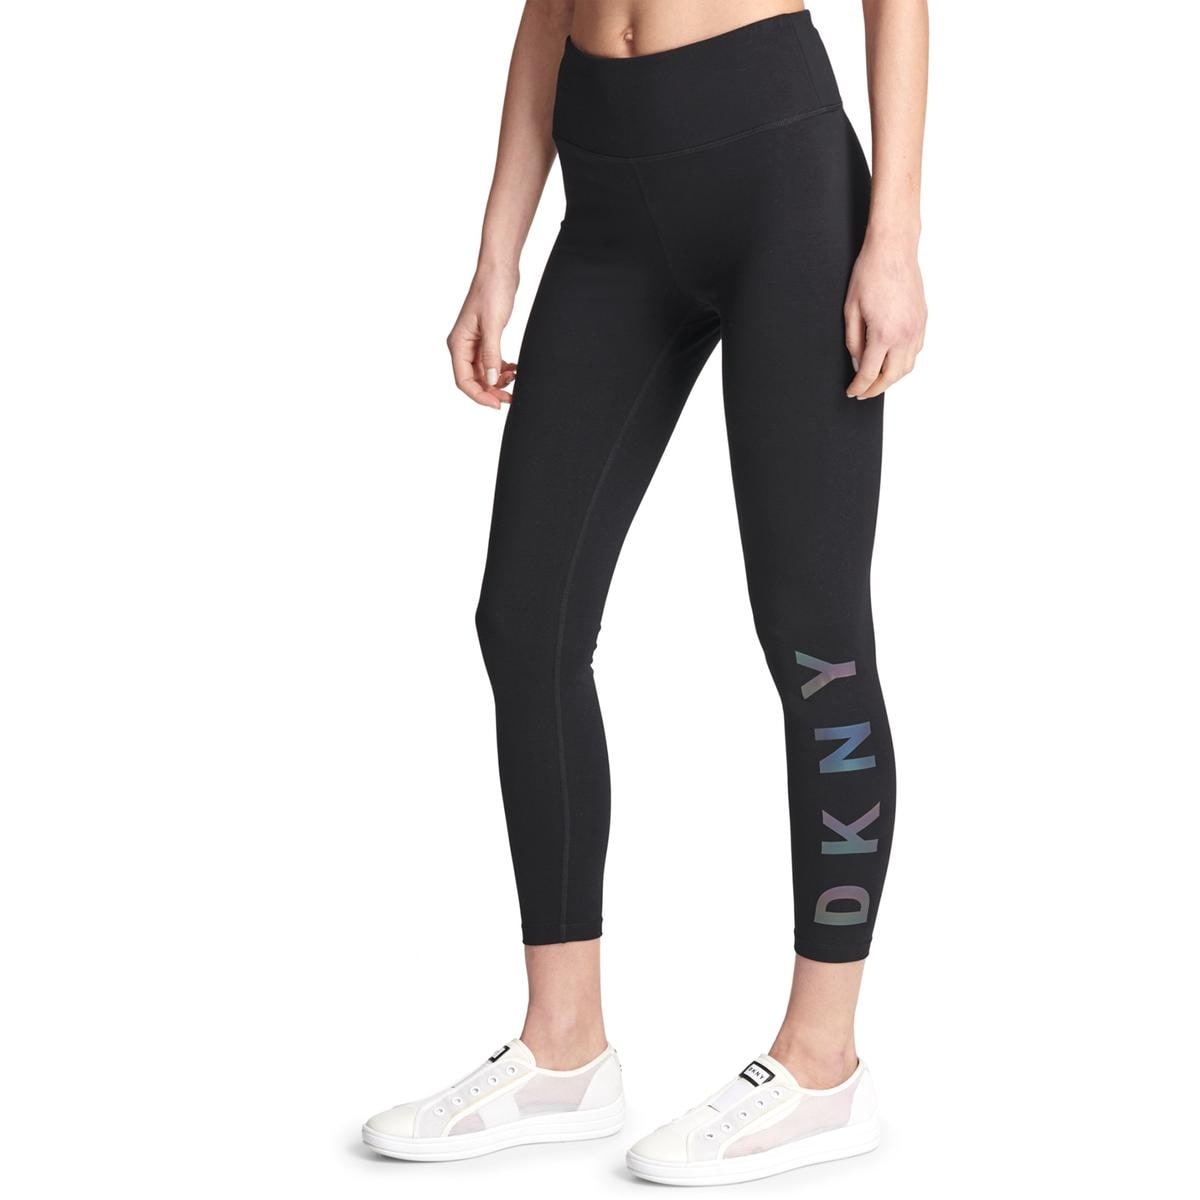 https://ak1.ostkcdn.com/images/products/is/images/direct/0efc348eb035bce830145d4c6b10c30e0344f52d/DKNY-Sport-Womens-Athletic-Leggings-Running-Workout.jpg